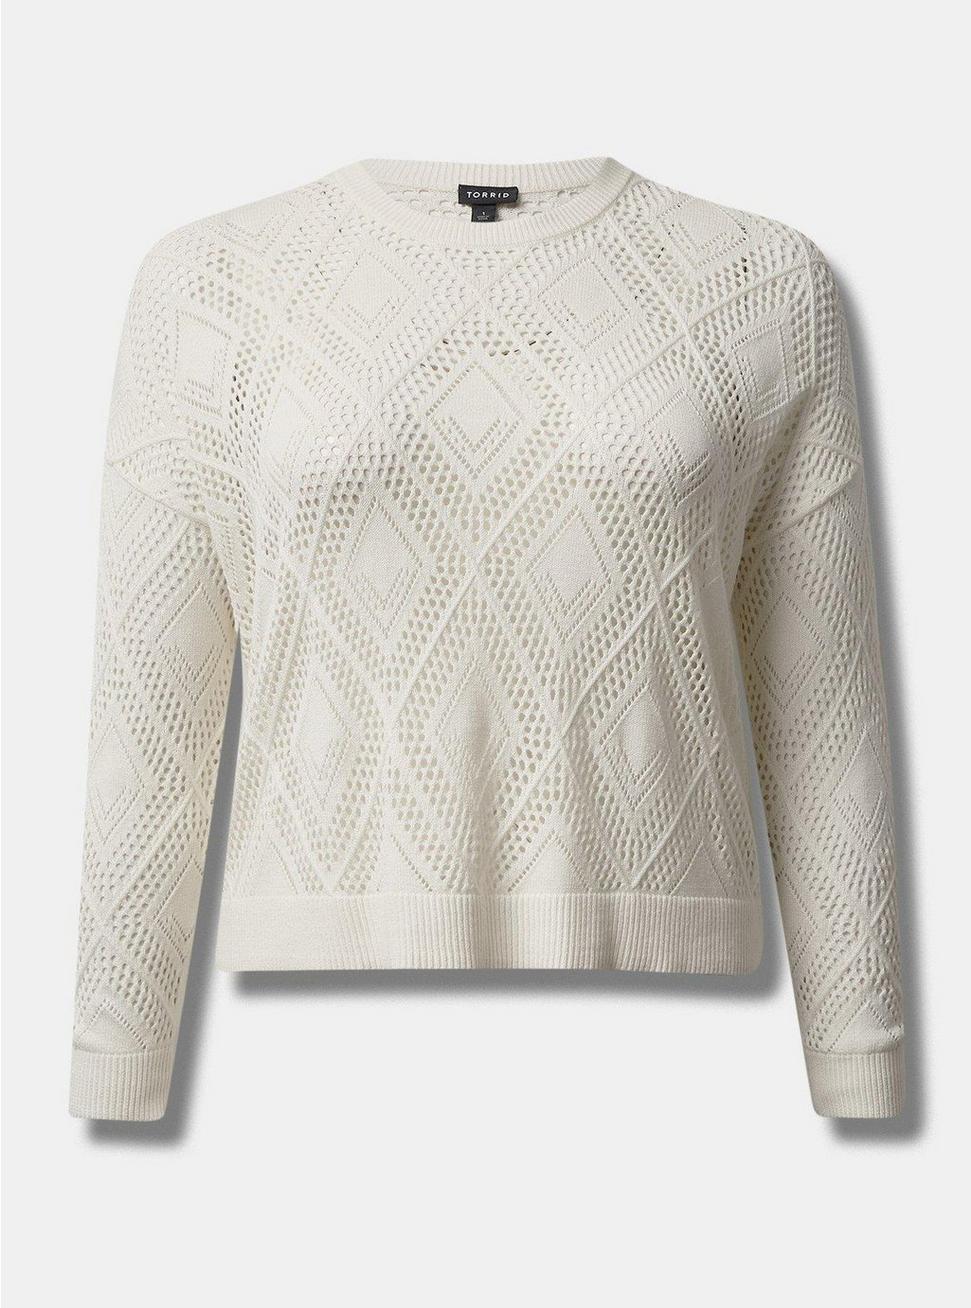 Pointelle Pullover Long Sleeve Sweater, CREAM, hi-res